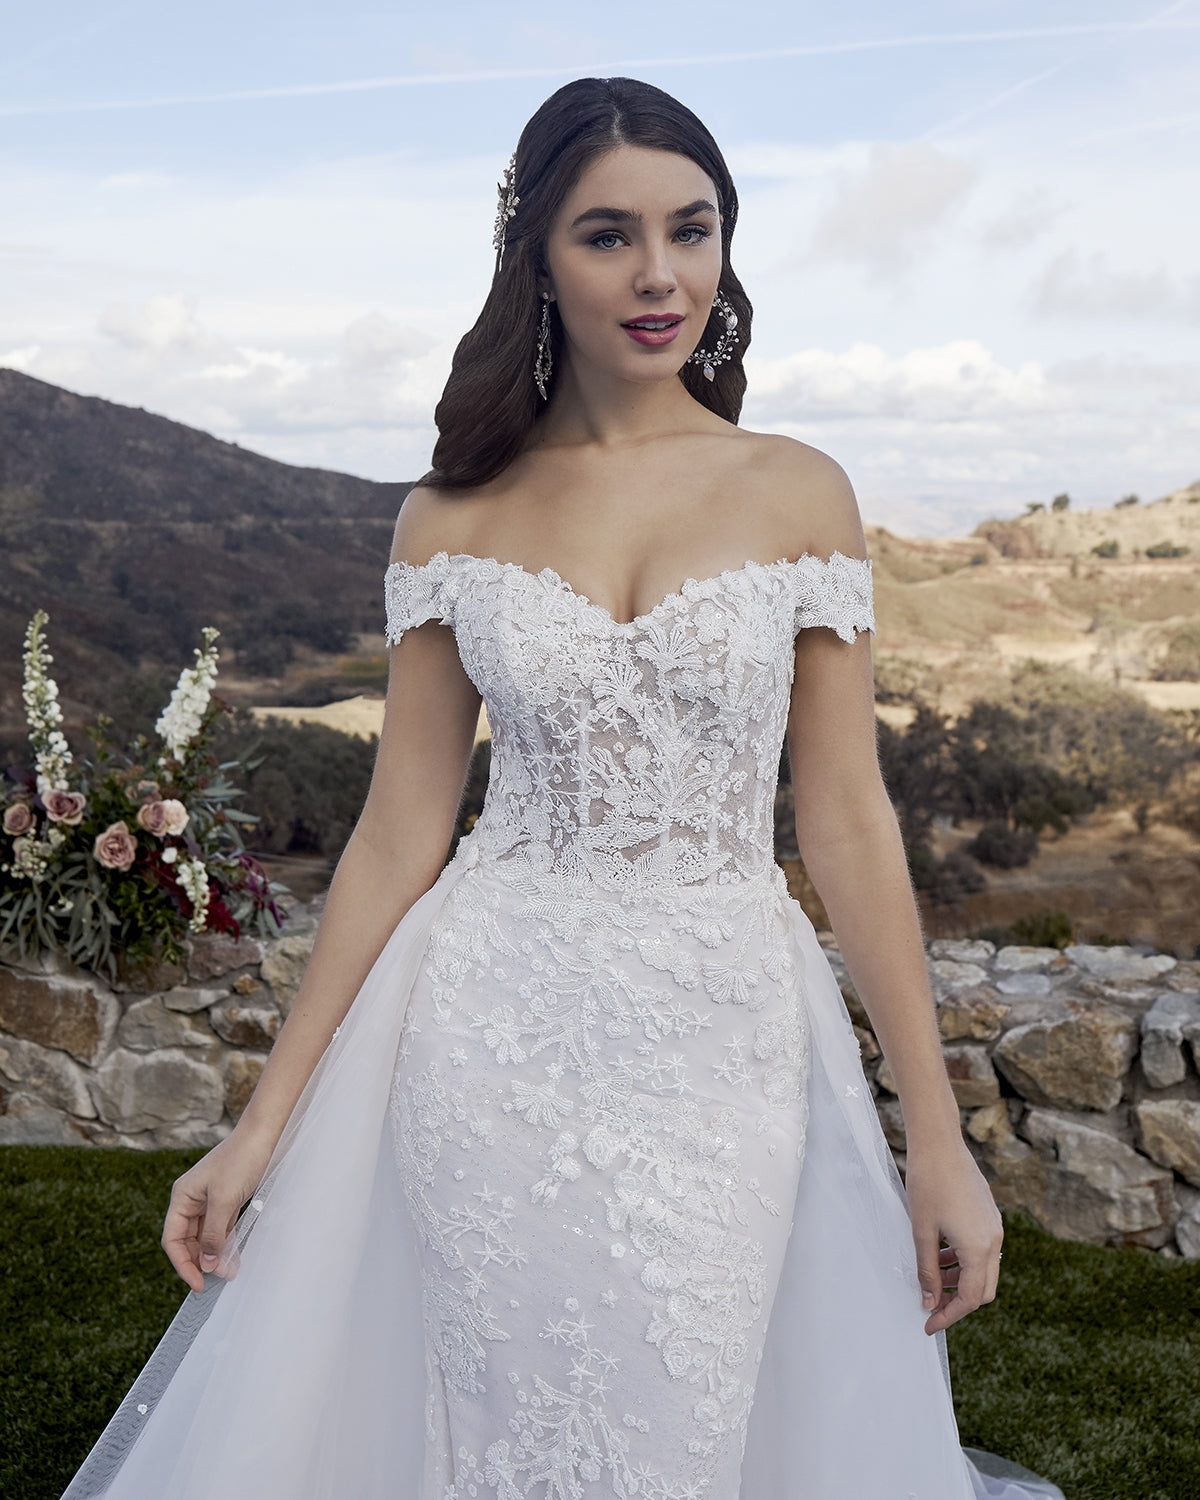 Casablanca Bridal 2419 MCKENZIE Wedding Dress Overskirt Bridal Gown off the shoulder  Beach wedding dress glam rises to a whole new level of beauty with Style 2419 McKenzie by Casablanca Bridal. Beaded lace appliques take shape as subtle stars and flowing botanicals, sitting delicately atop sequined tulle that catches the sunlight at every angle. A classic fit-and-flare silhouette hugs the natural shape of the body comfortably, while a removable organza skirt attachment with matching lace appliques, 